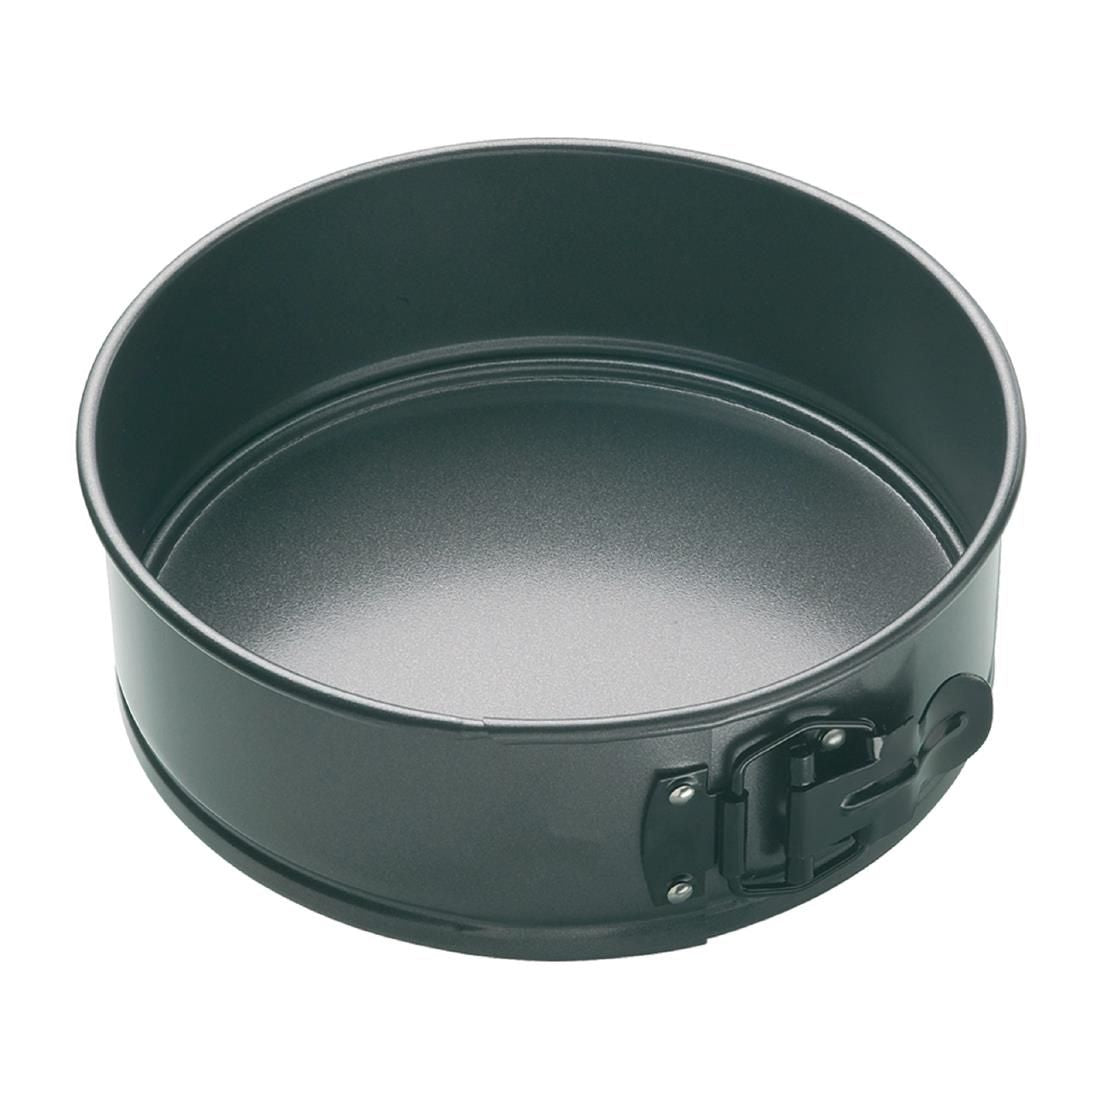 FC351 Masterclass Non-Stick Spring Form Round Cake Tin 150mm JD Catering Equipment Solutions Ltd